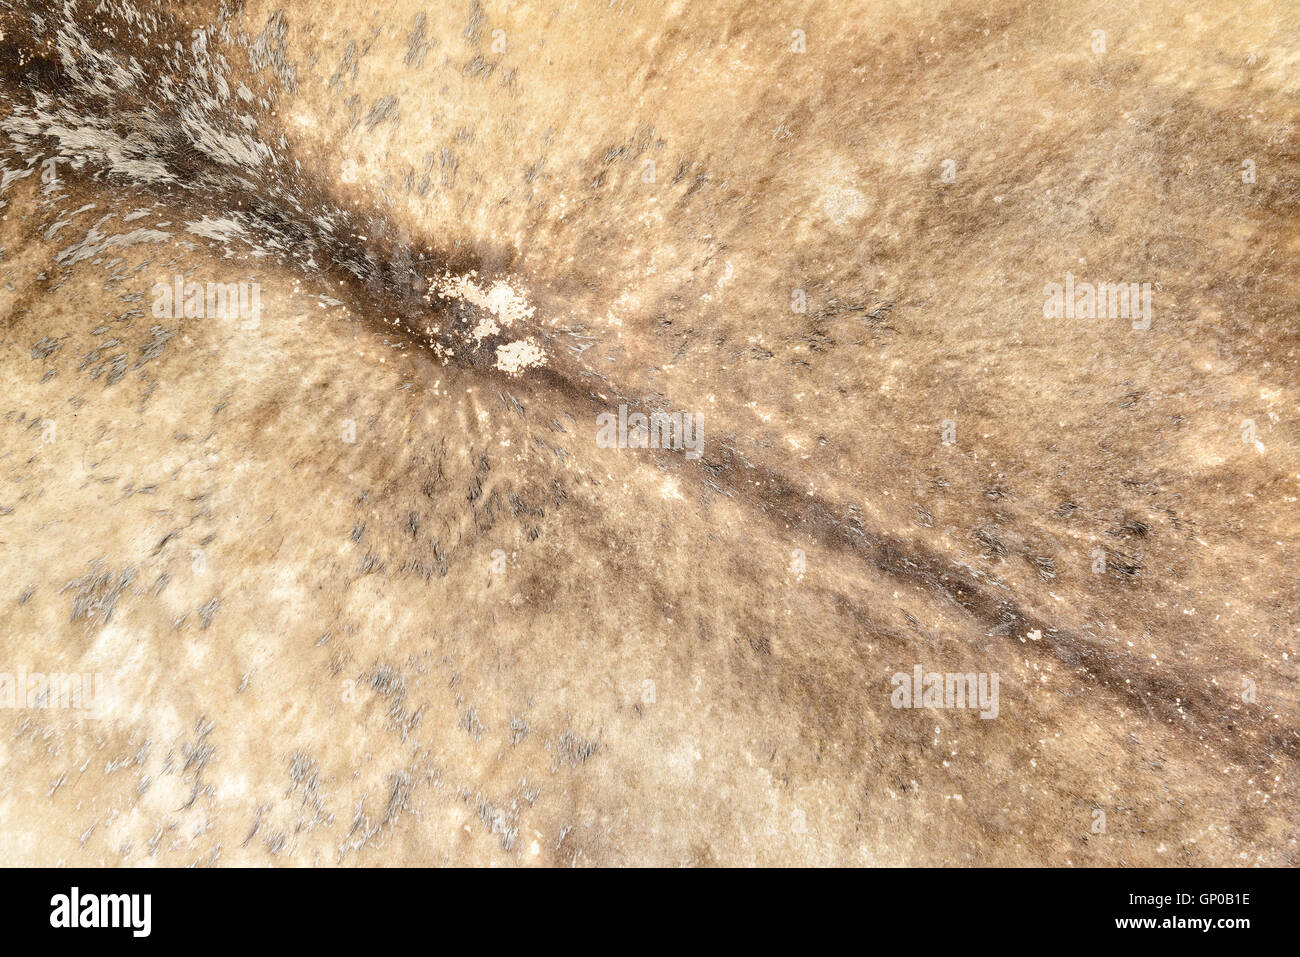 Traces on fragment of cow skin or cowhide, close up leather textured. Stock Photo